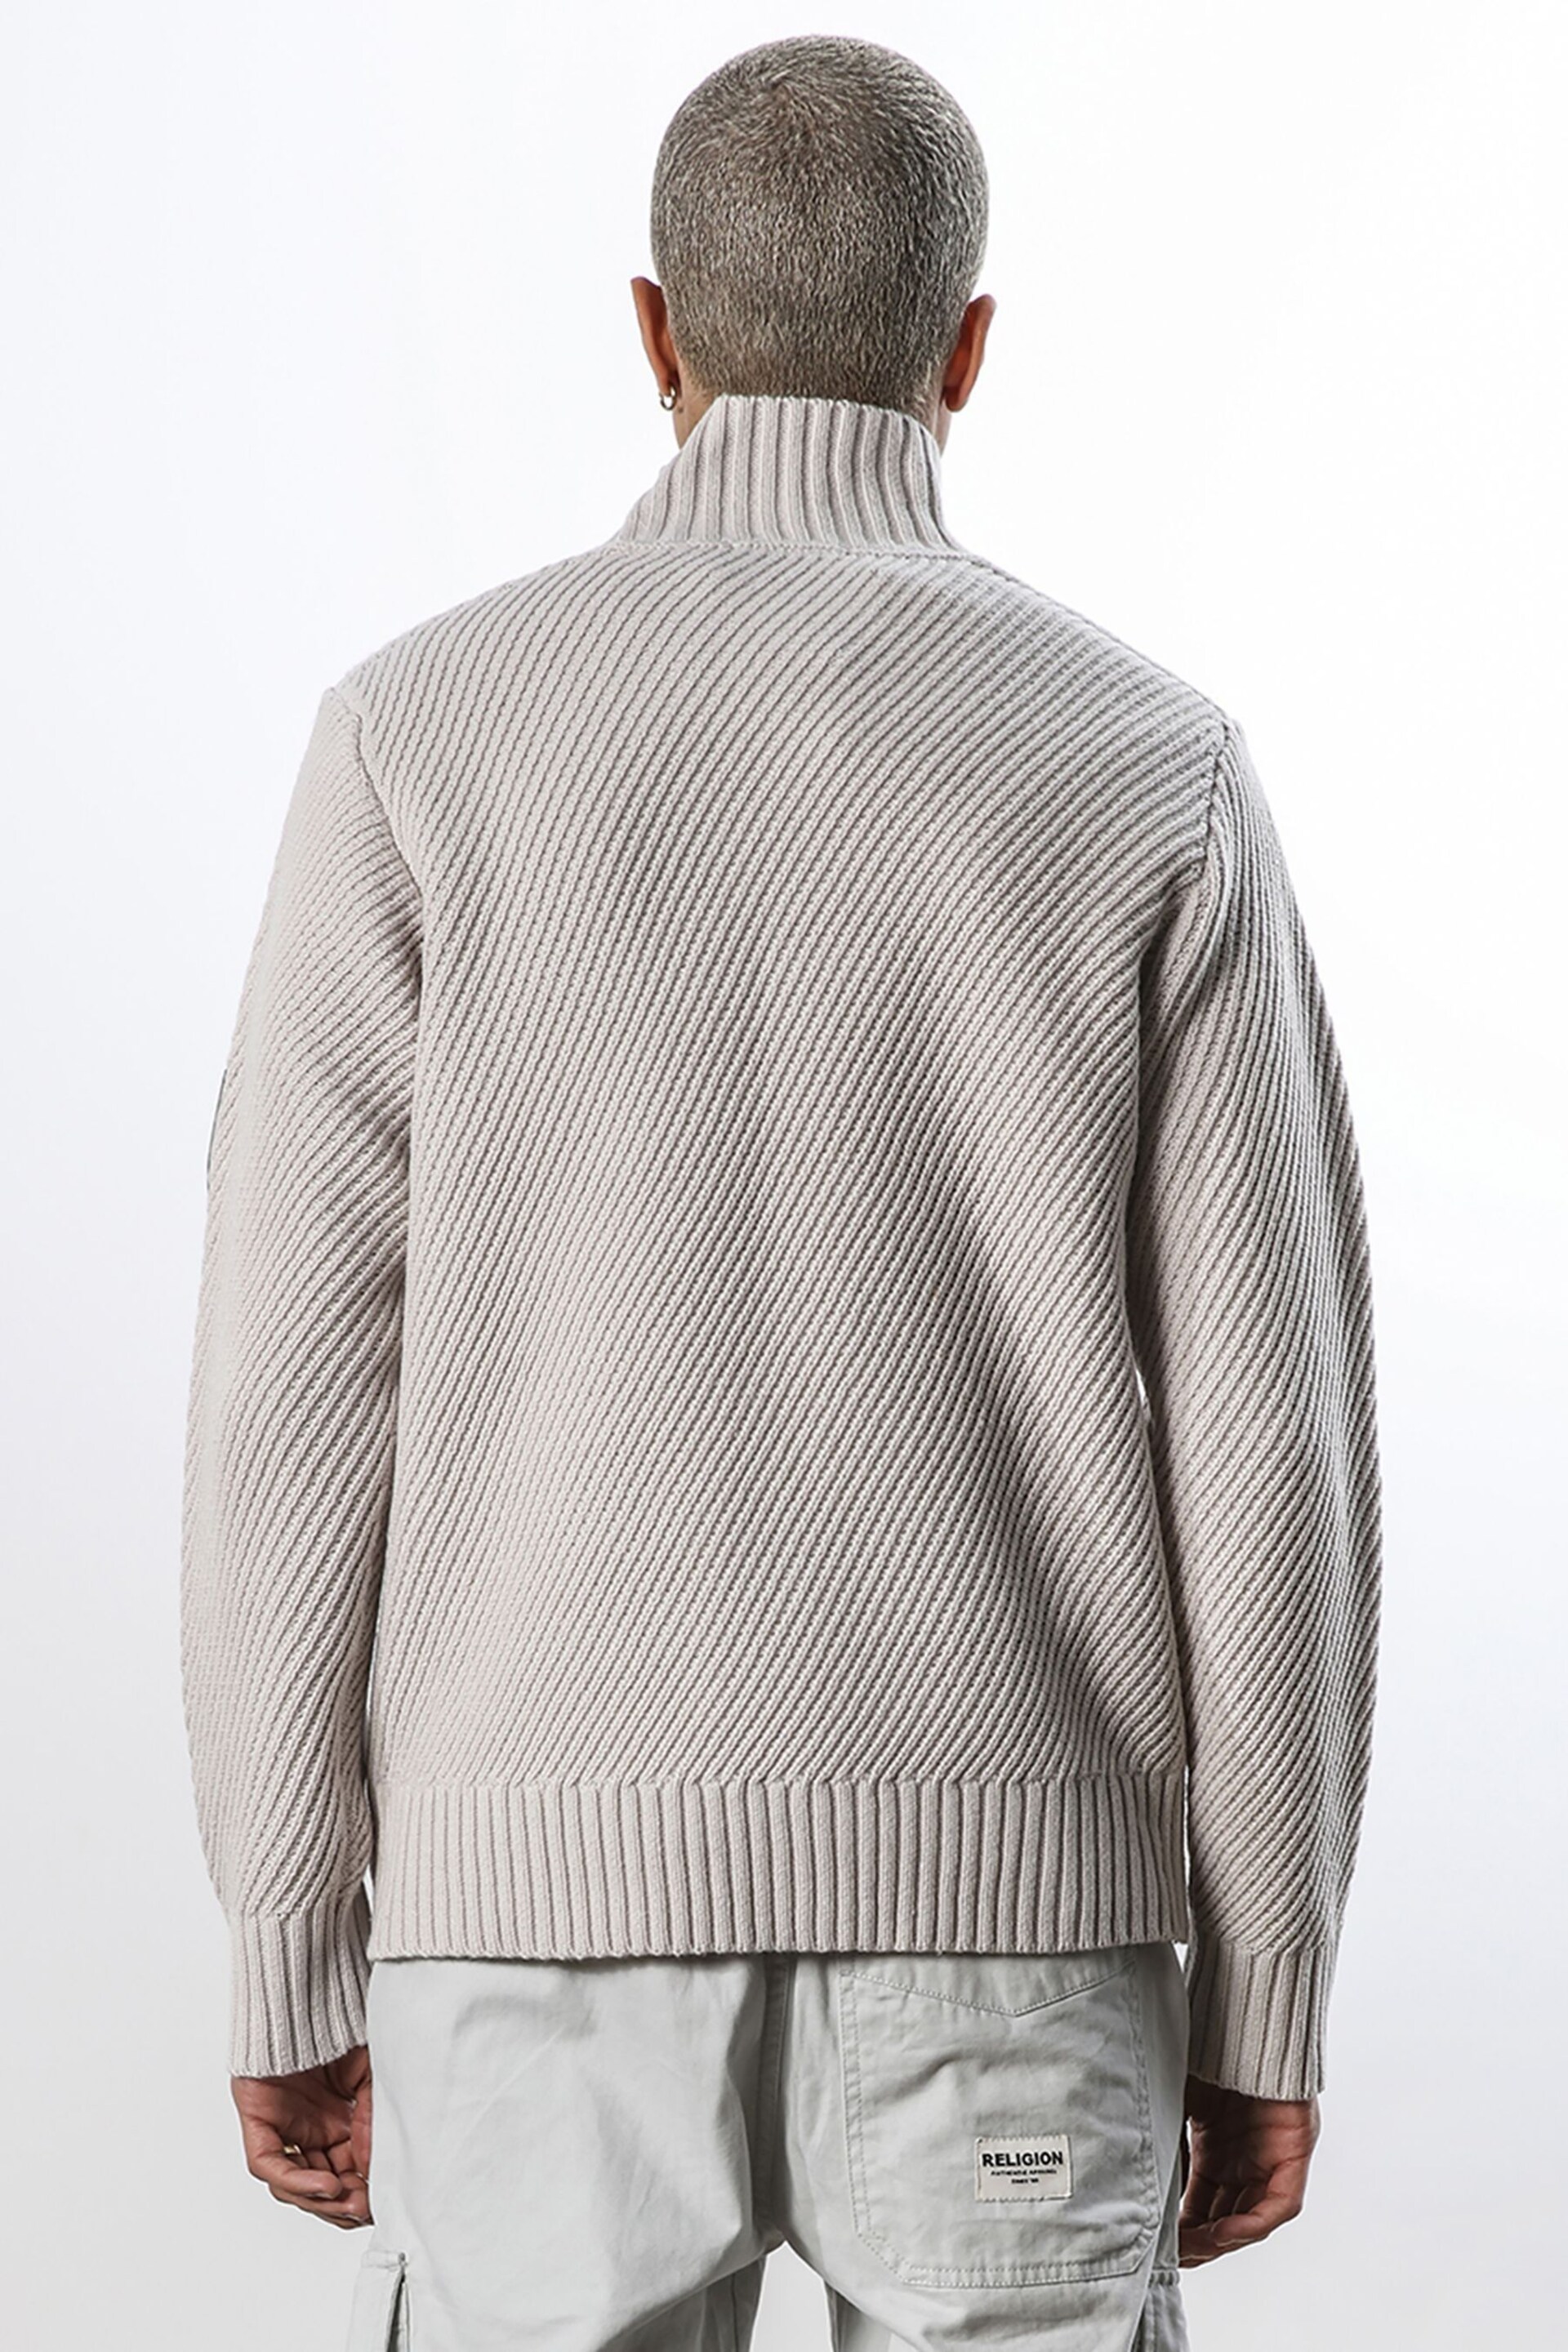 Religion Natural Relaxed Fit Roll Neck Knit Jumper With Ribbed Trims - Image 2 of 5